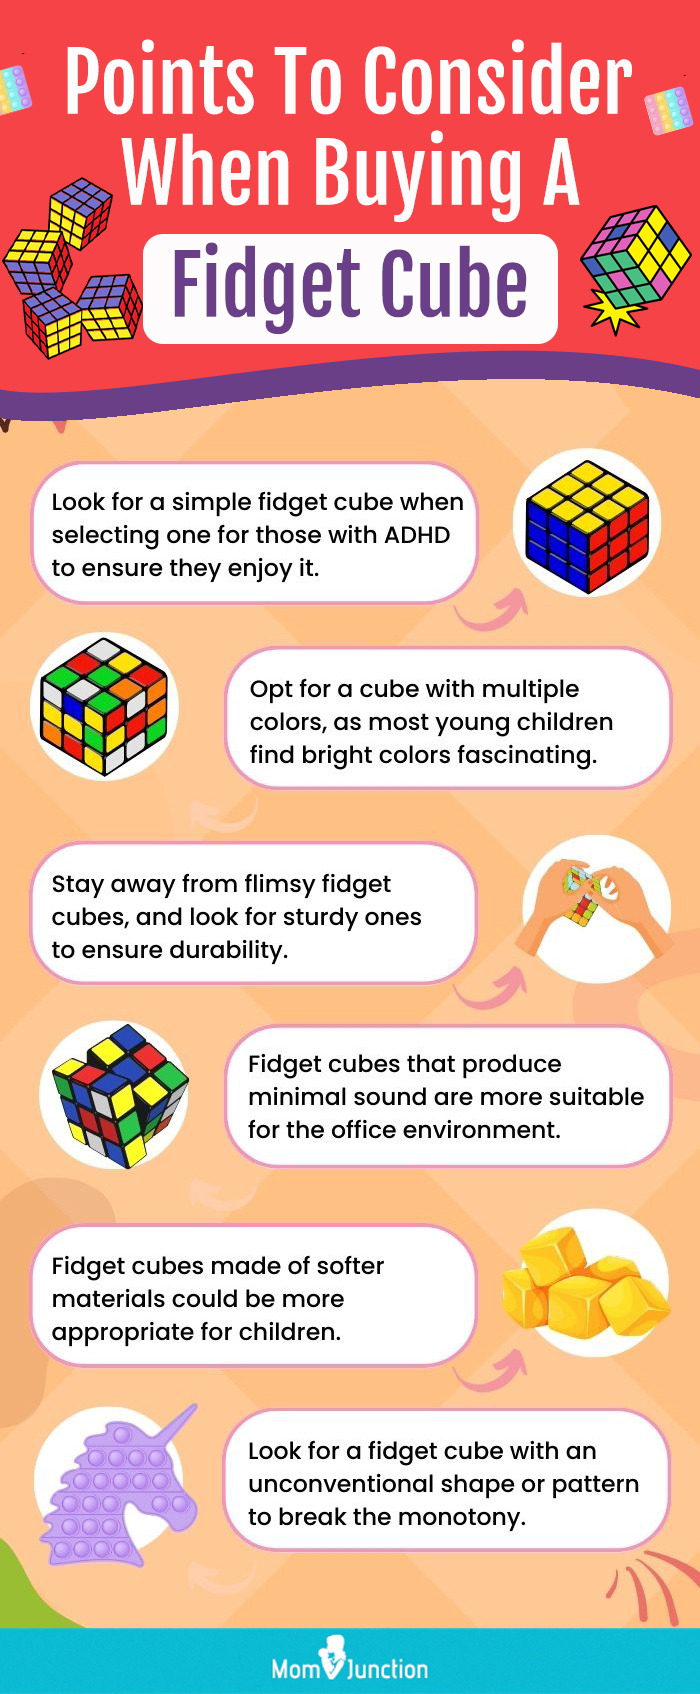 Points To Consider When Buying A Fidget Cube (infographic)